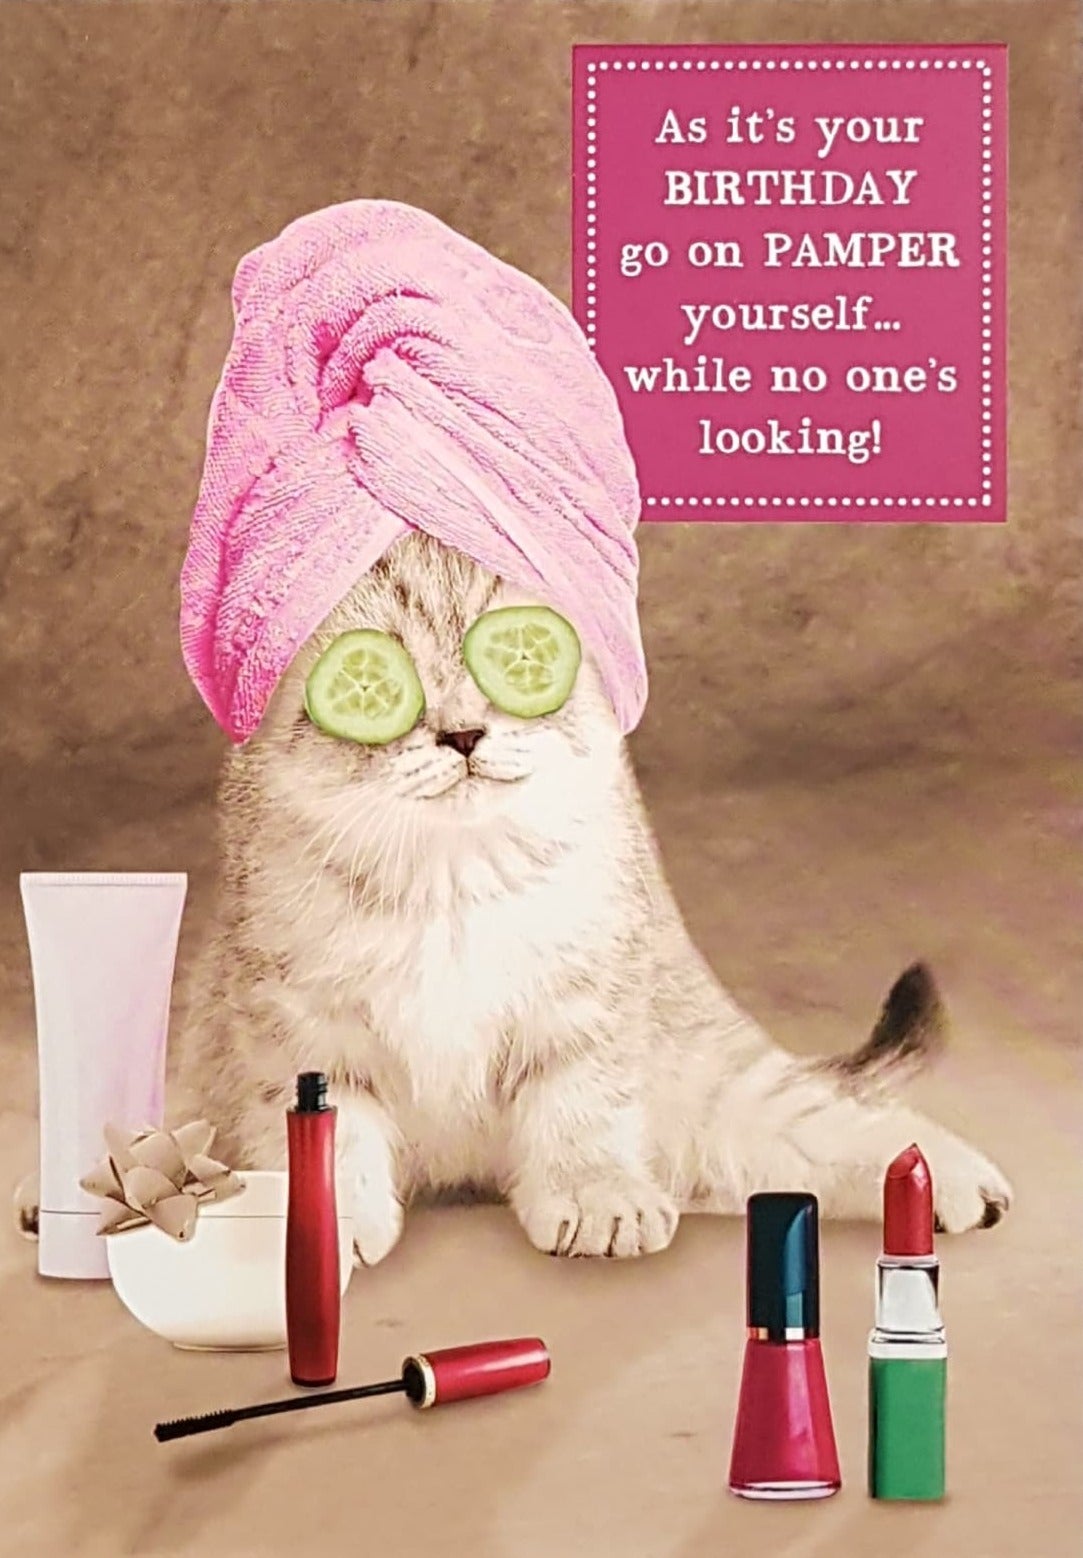 Birthday Card - 'Pamper Yourself While No One's Looking'